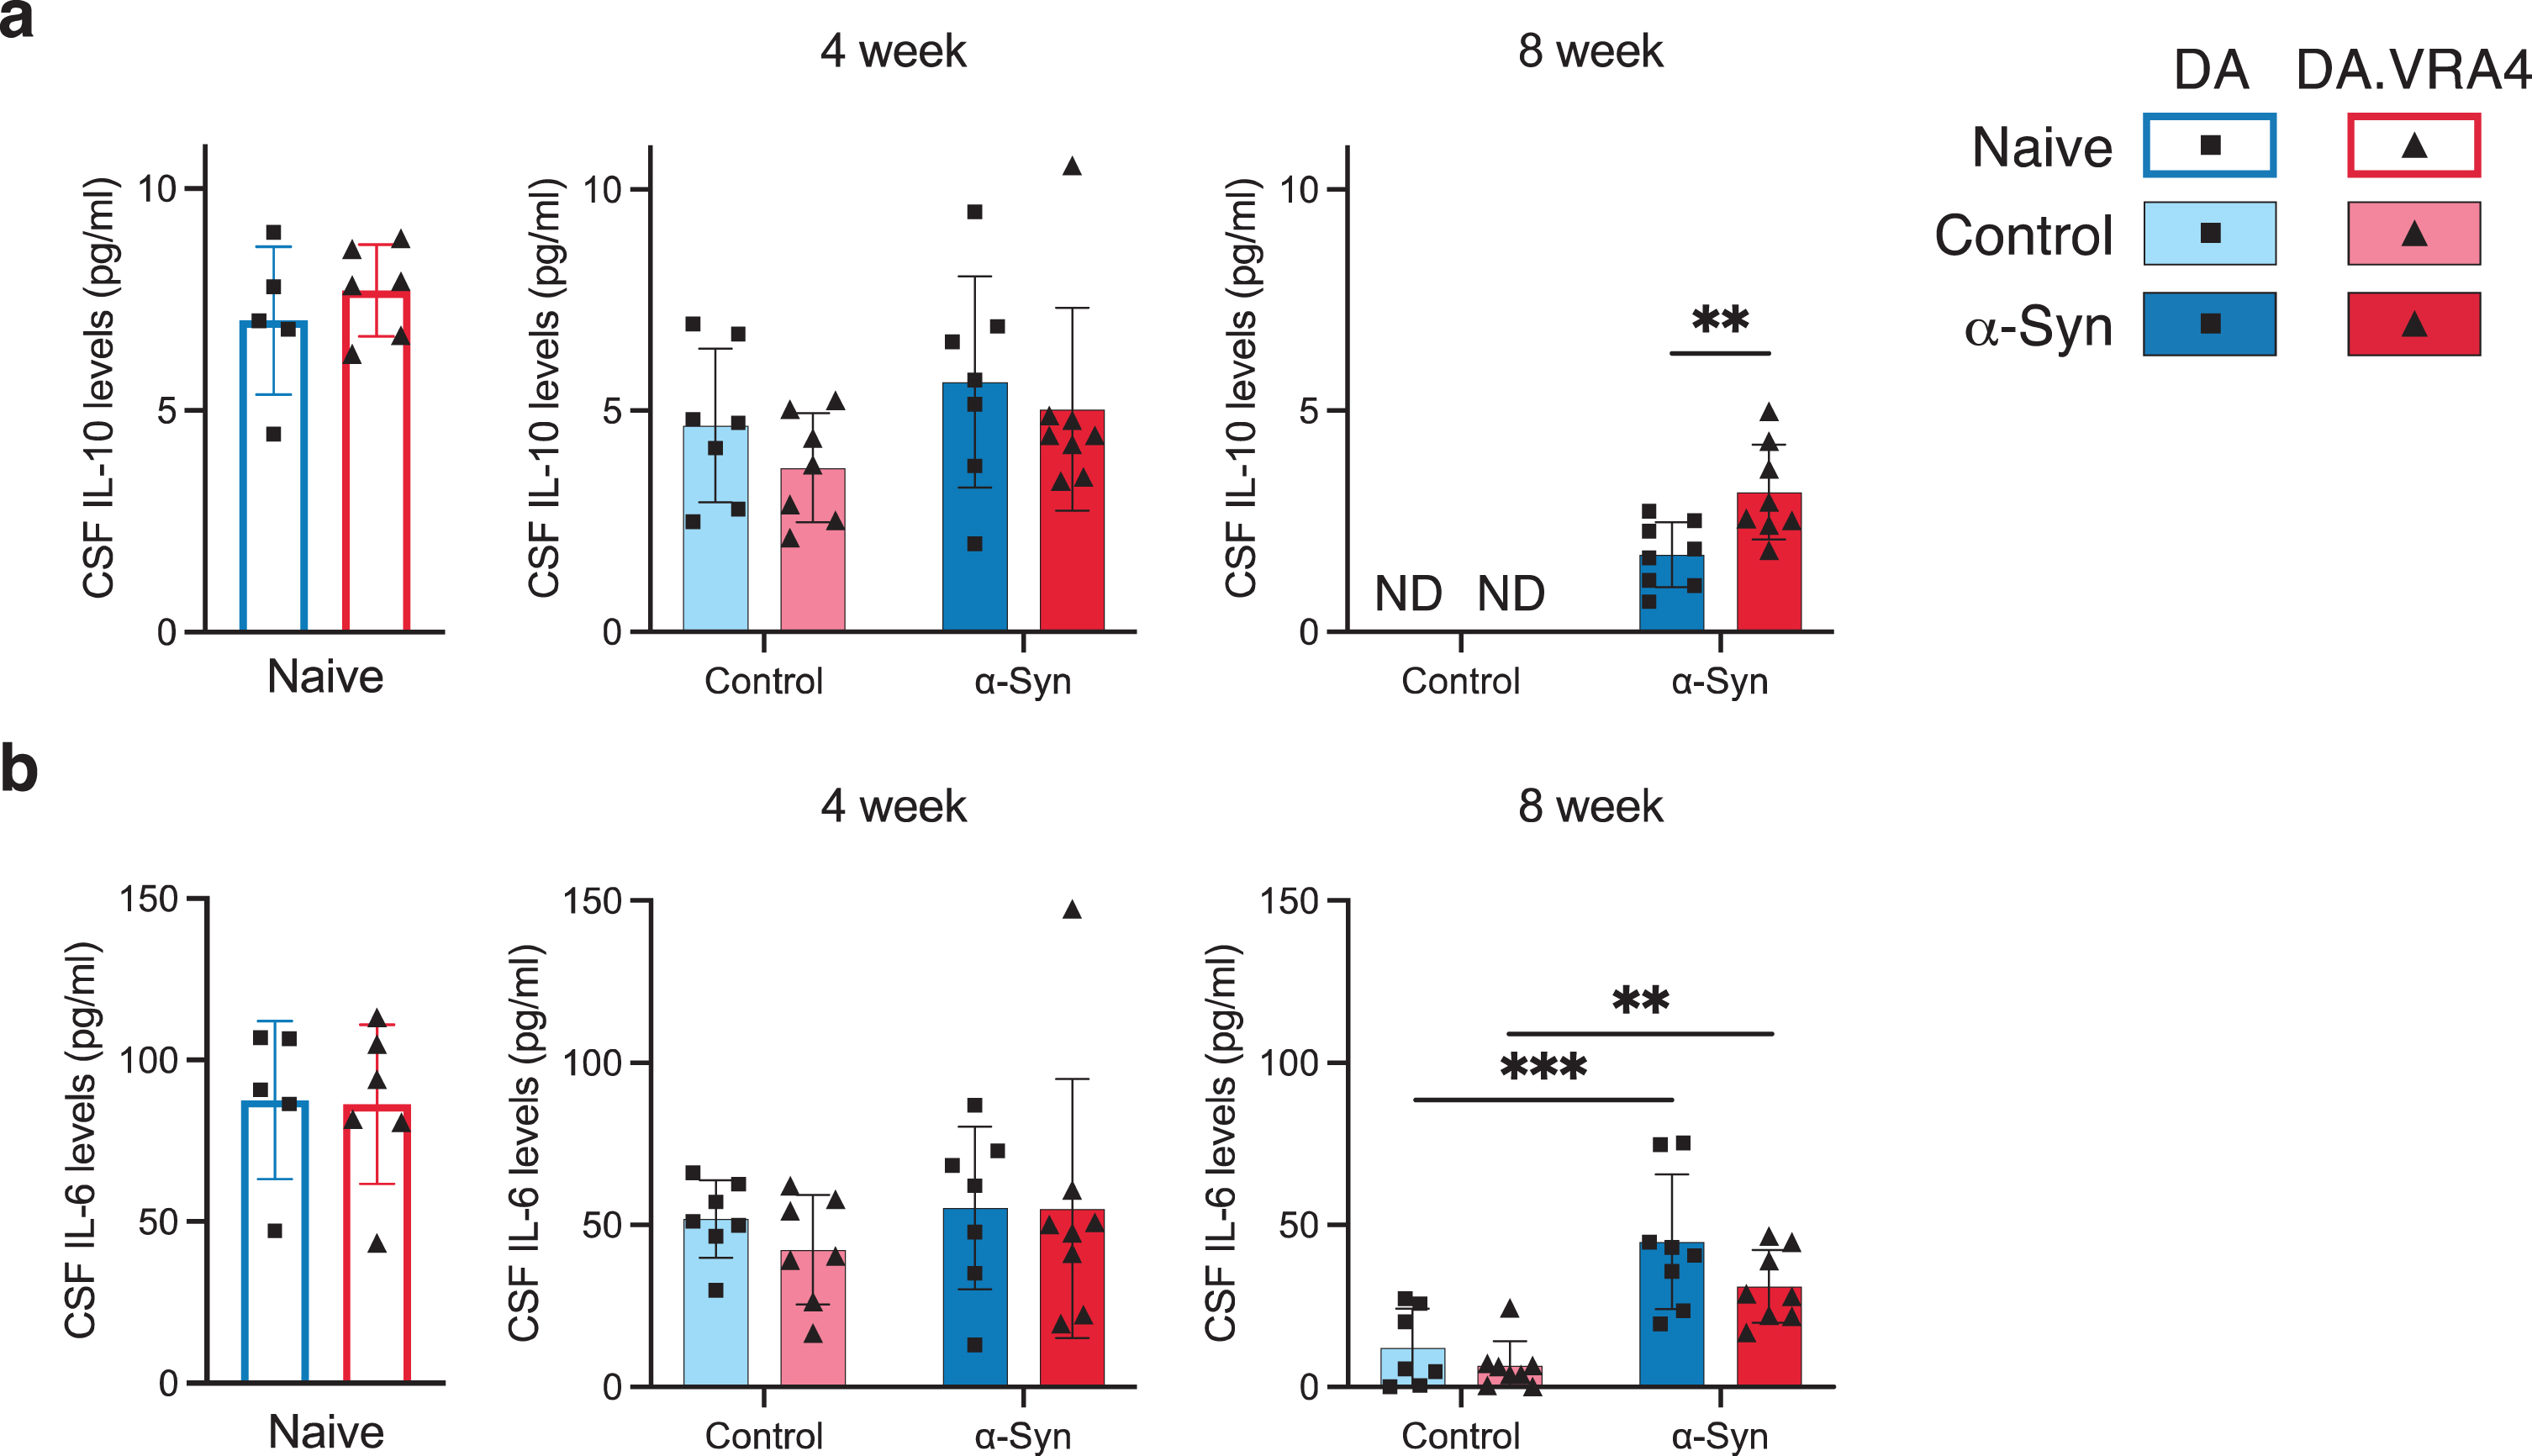 CSF IL-10 and IL-6 cytokine levels are regulated by differing Ciita levels and in response to rAAV-α-Syn+PFF, respectively. a. Quantification of IL-10 levels in cerebrospinal fluid (CSF) measured by ELISA. Non-detected levels indicated by “ND”. b. Quantification of IL-6 levels in CSF measured by ELISA. a–b. Naïve (DA n = 5, DA.VRA4 n = 6), 4-week; control (DA n = 7, DA.VRA4 n = 7) and α-Syn (DA n = 7, DA.VRA4 n = 8), 8-week; control (DA n = 7, DA.VRA4 n = 8) and α-Syn (DA n = 8, DA.VRA4 n = 8). α-Syn = rAAV-α-Syn+PFF. Control = rAAV-(–)+DPBS. Naïve rats were compared by unpaired Student’s t-test. Groups at 4- and 8-weeks were compared with two-way ANOVA with 
Sˇ
ídák multiple comparison test (DA vs. DA.VRA4 and control vs. α-Syn). **p < 0.01 and ***p < 0.001. Data presented as mean±SD with individual values.